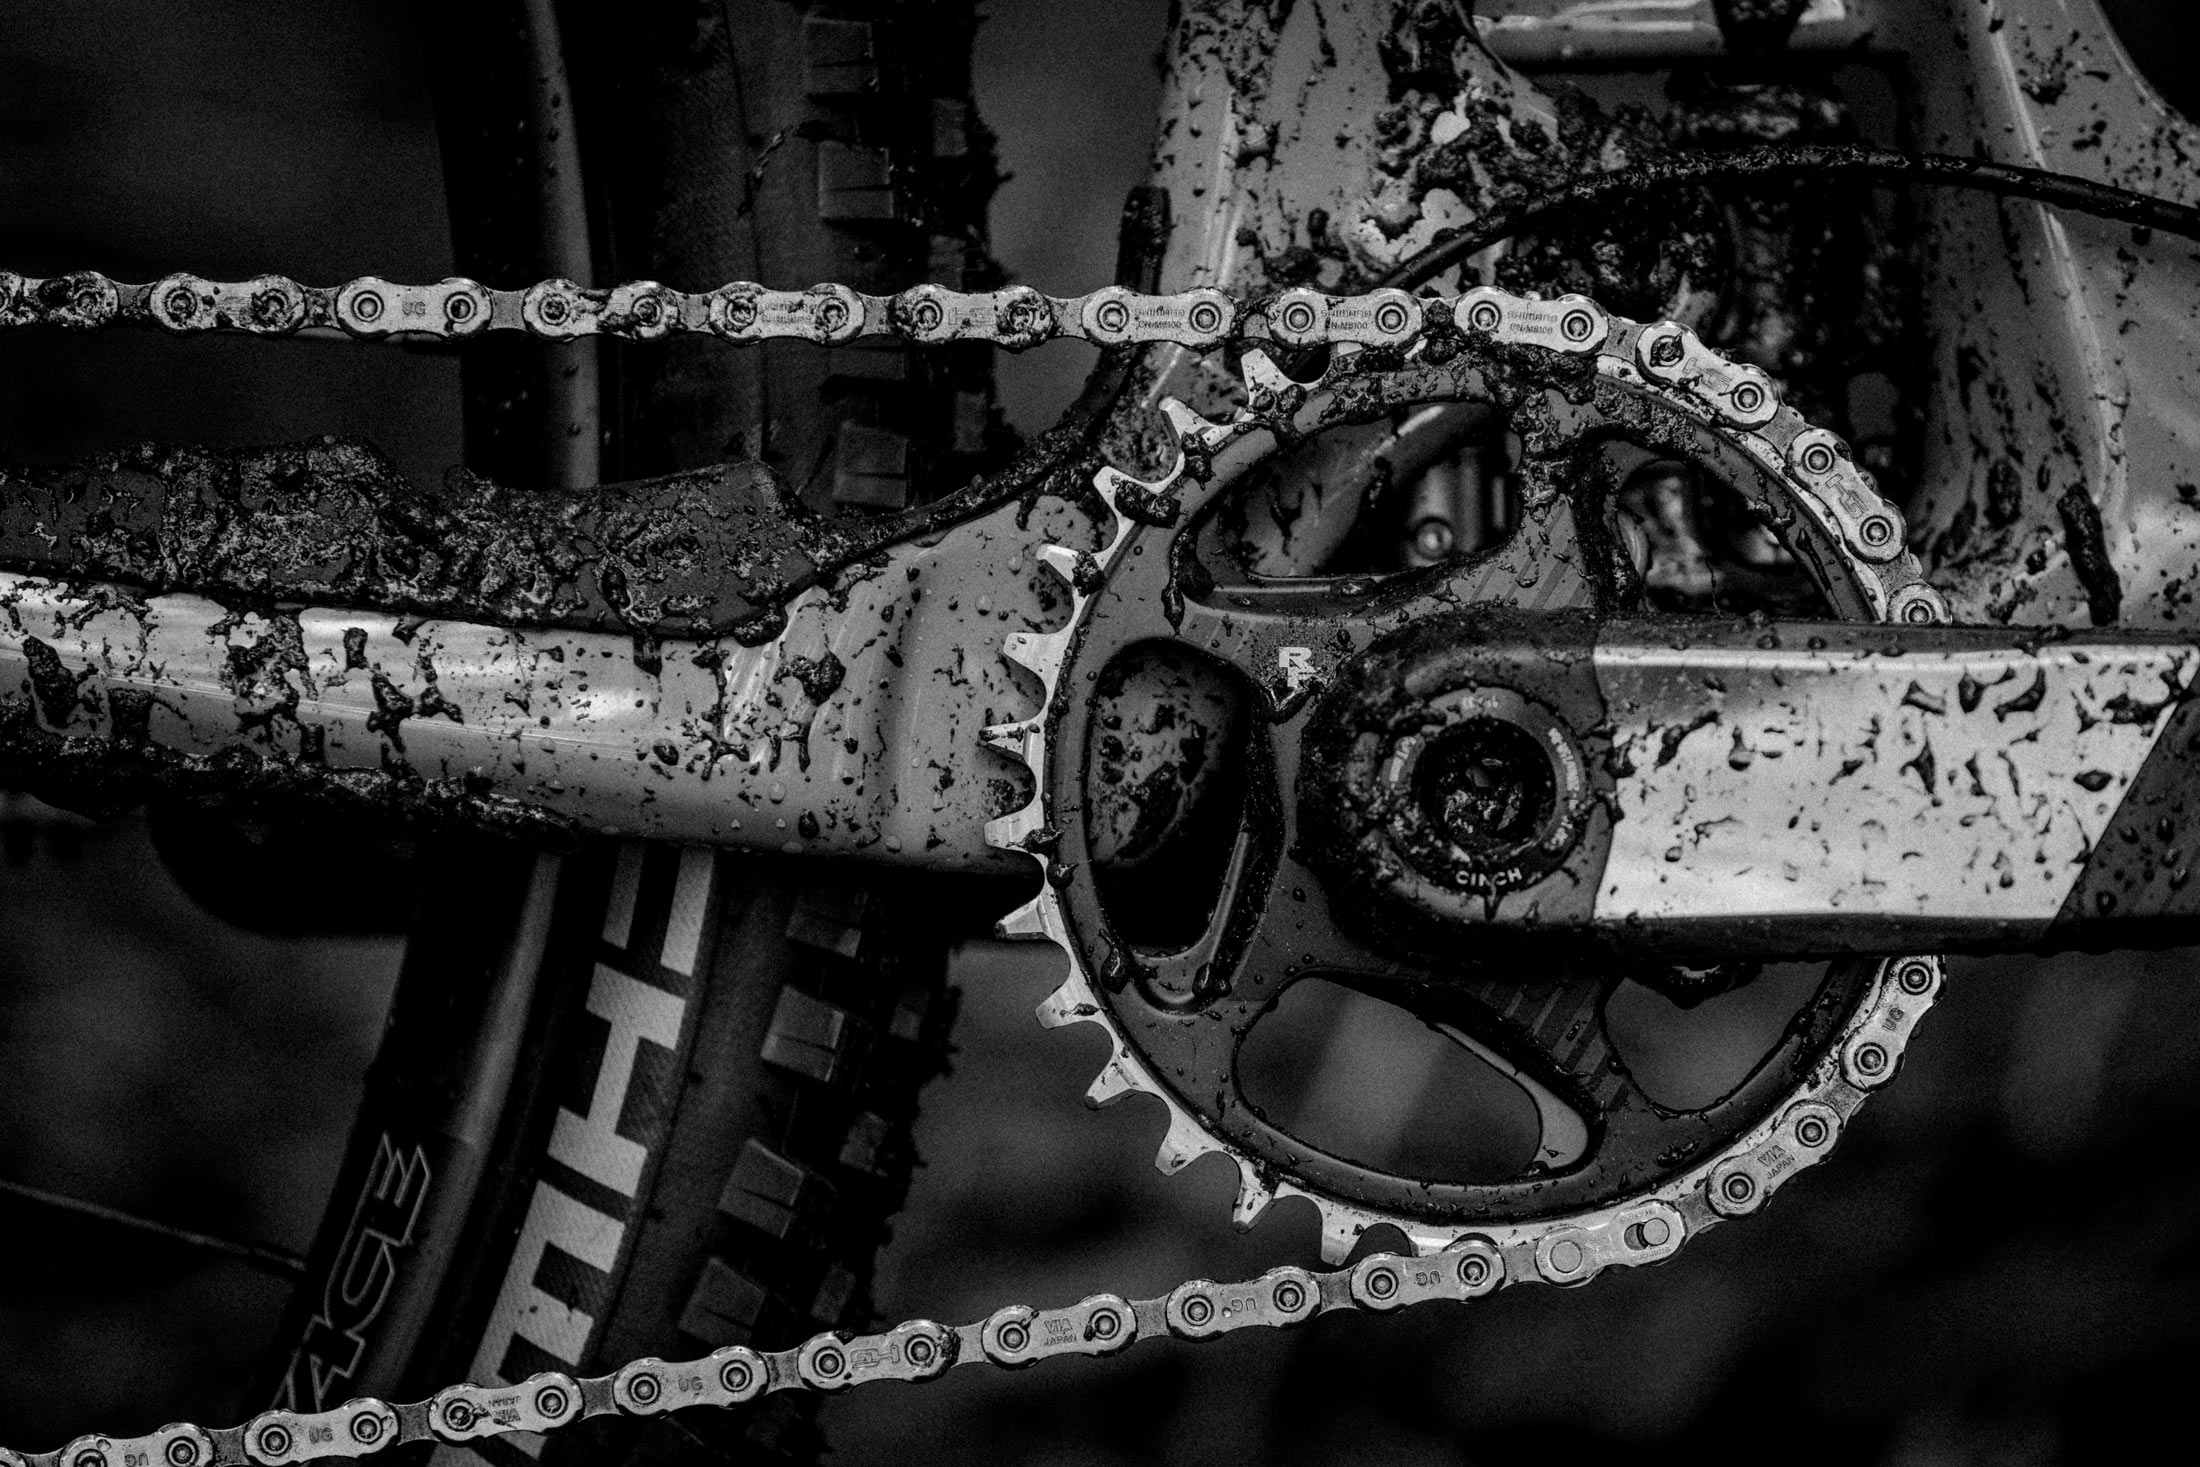 Race Face Era Chainring Blends Carbon, Alloy & Steel to Last Forever